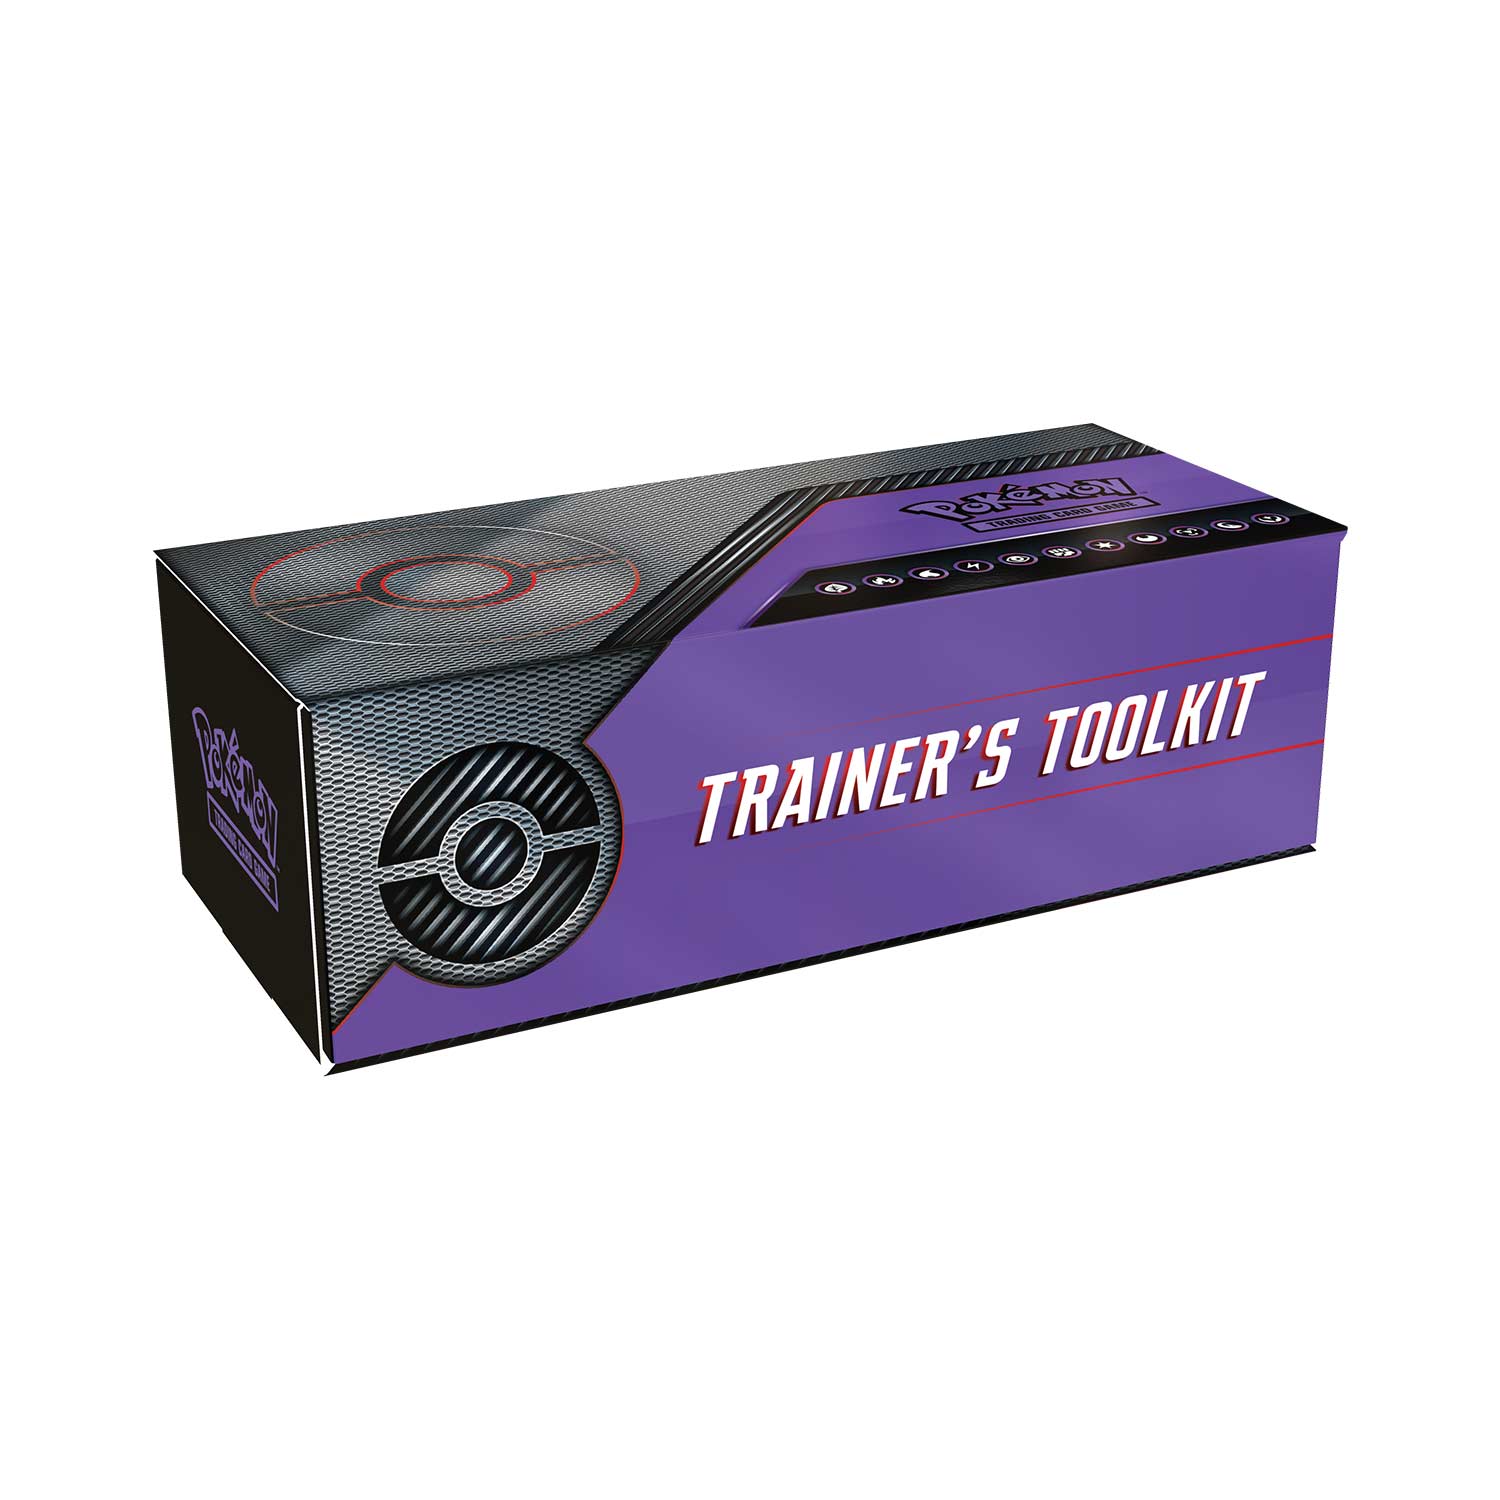 OtBG Trainer's Toolkit Dice Damage Counter Promo Pokemon TCG Official Sealed 